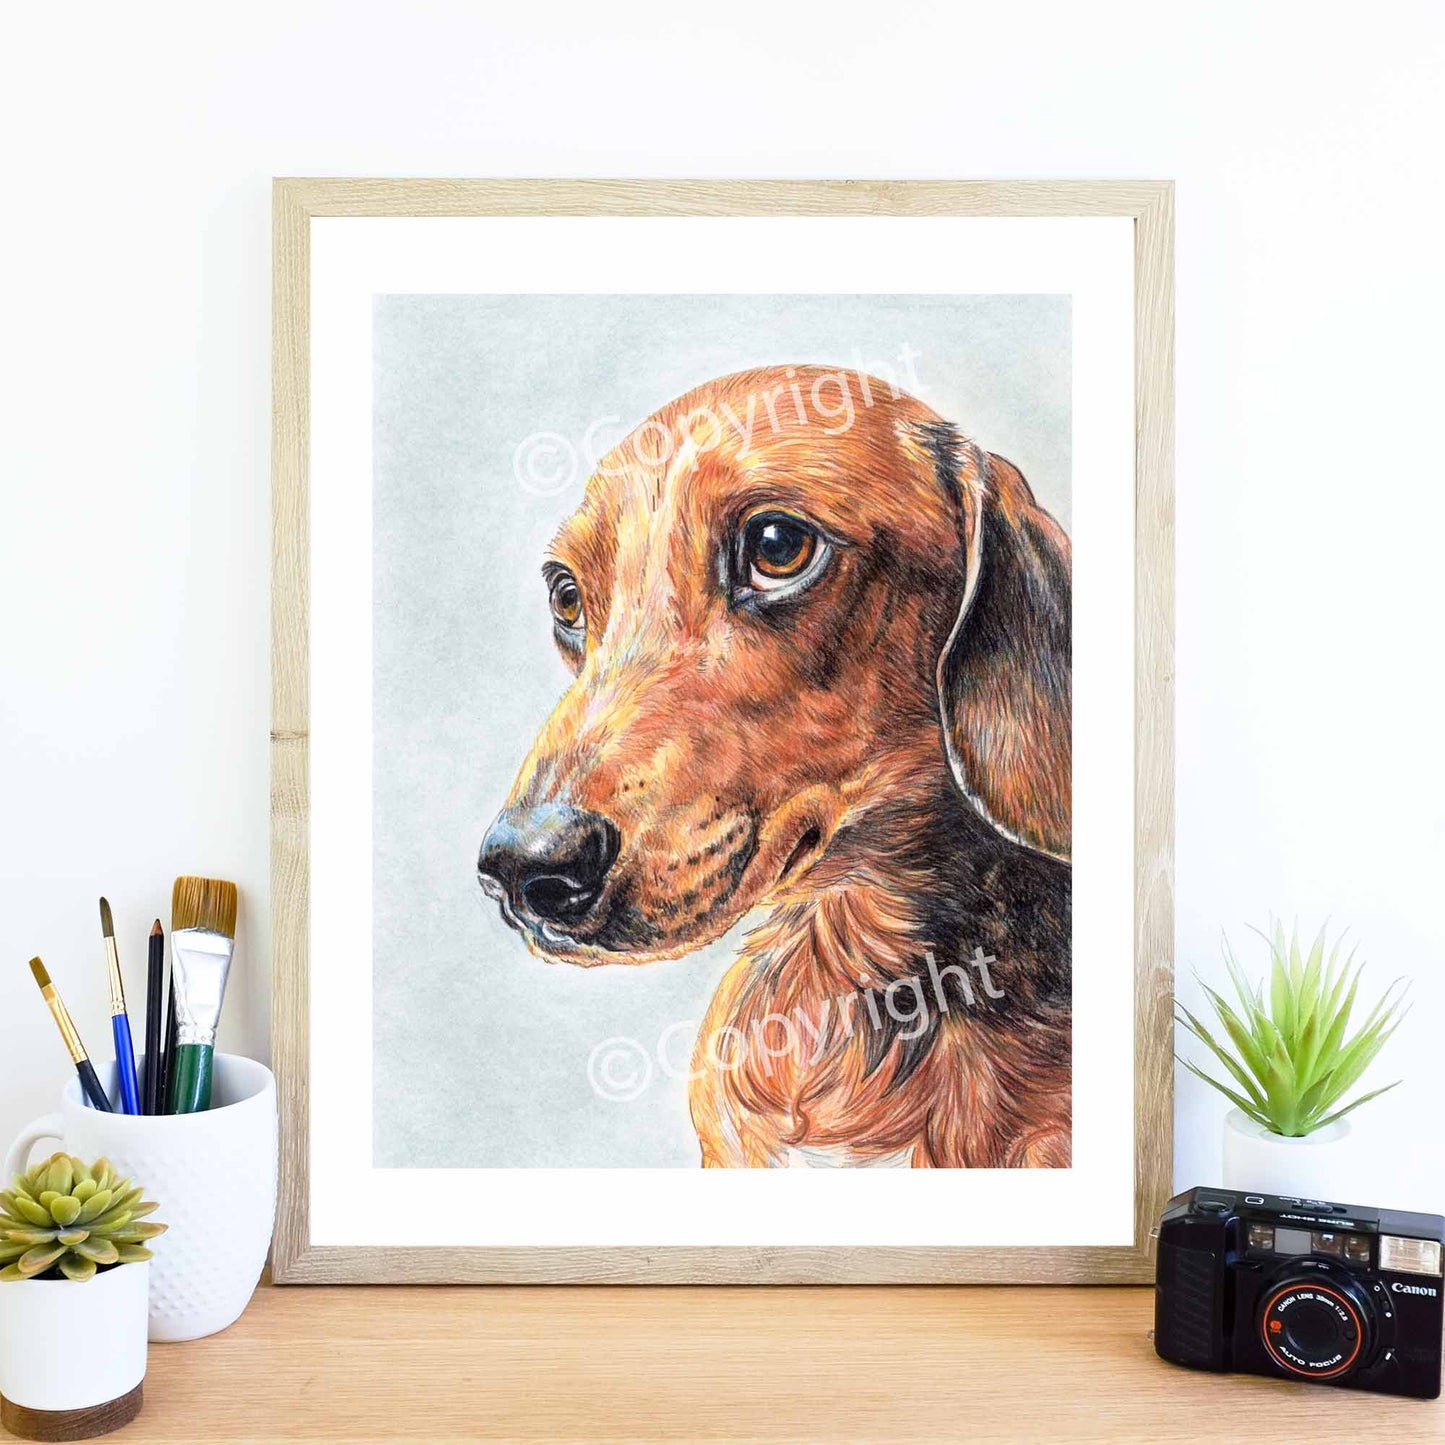 Original crayon drawing of a dachshund dog begging with his eyes for more food by Deidre Wicks